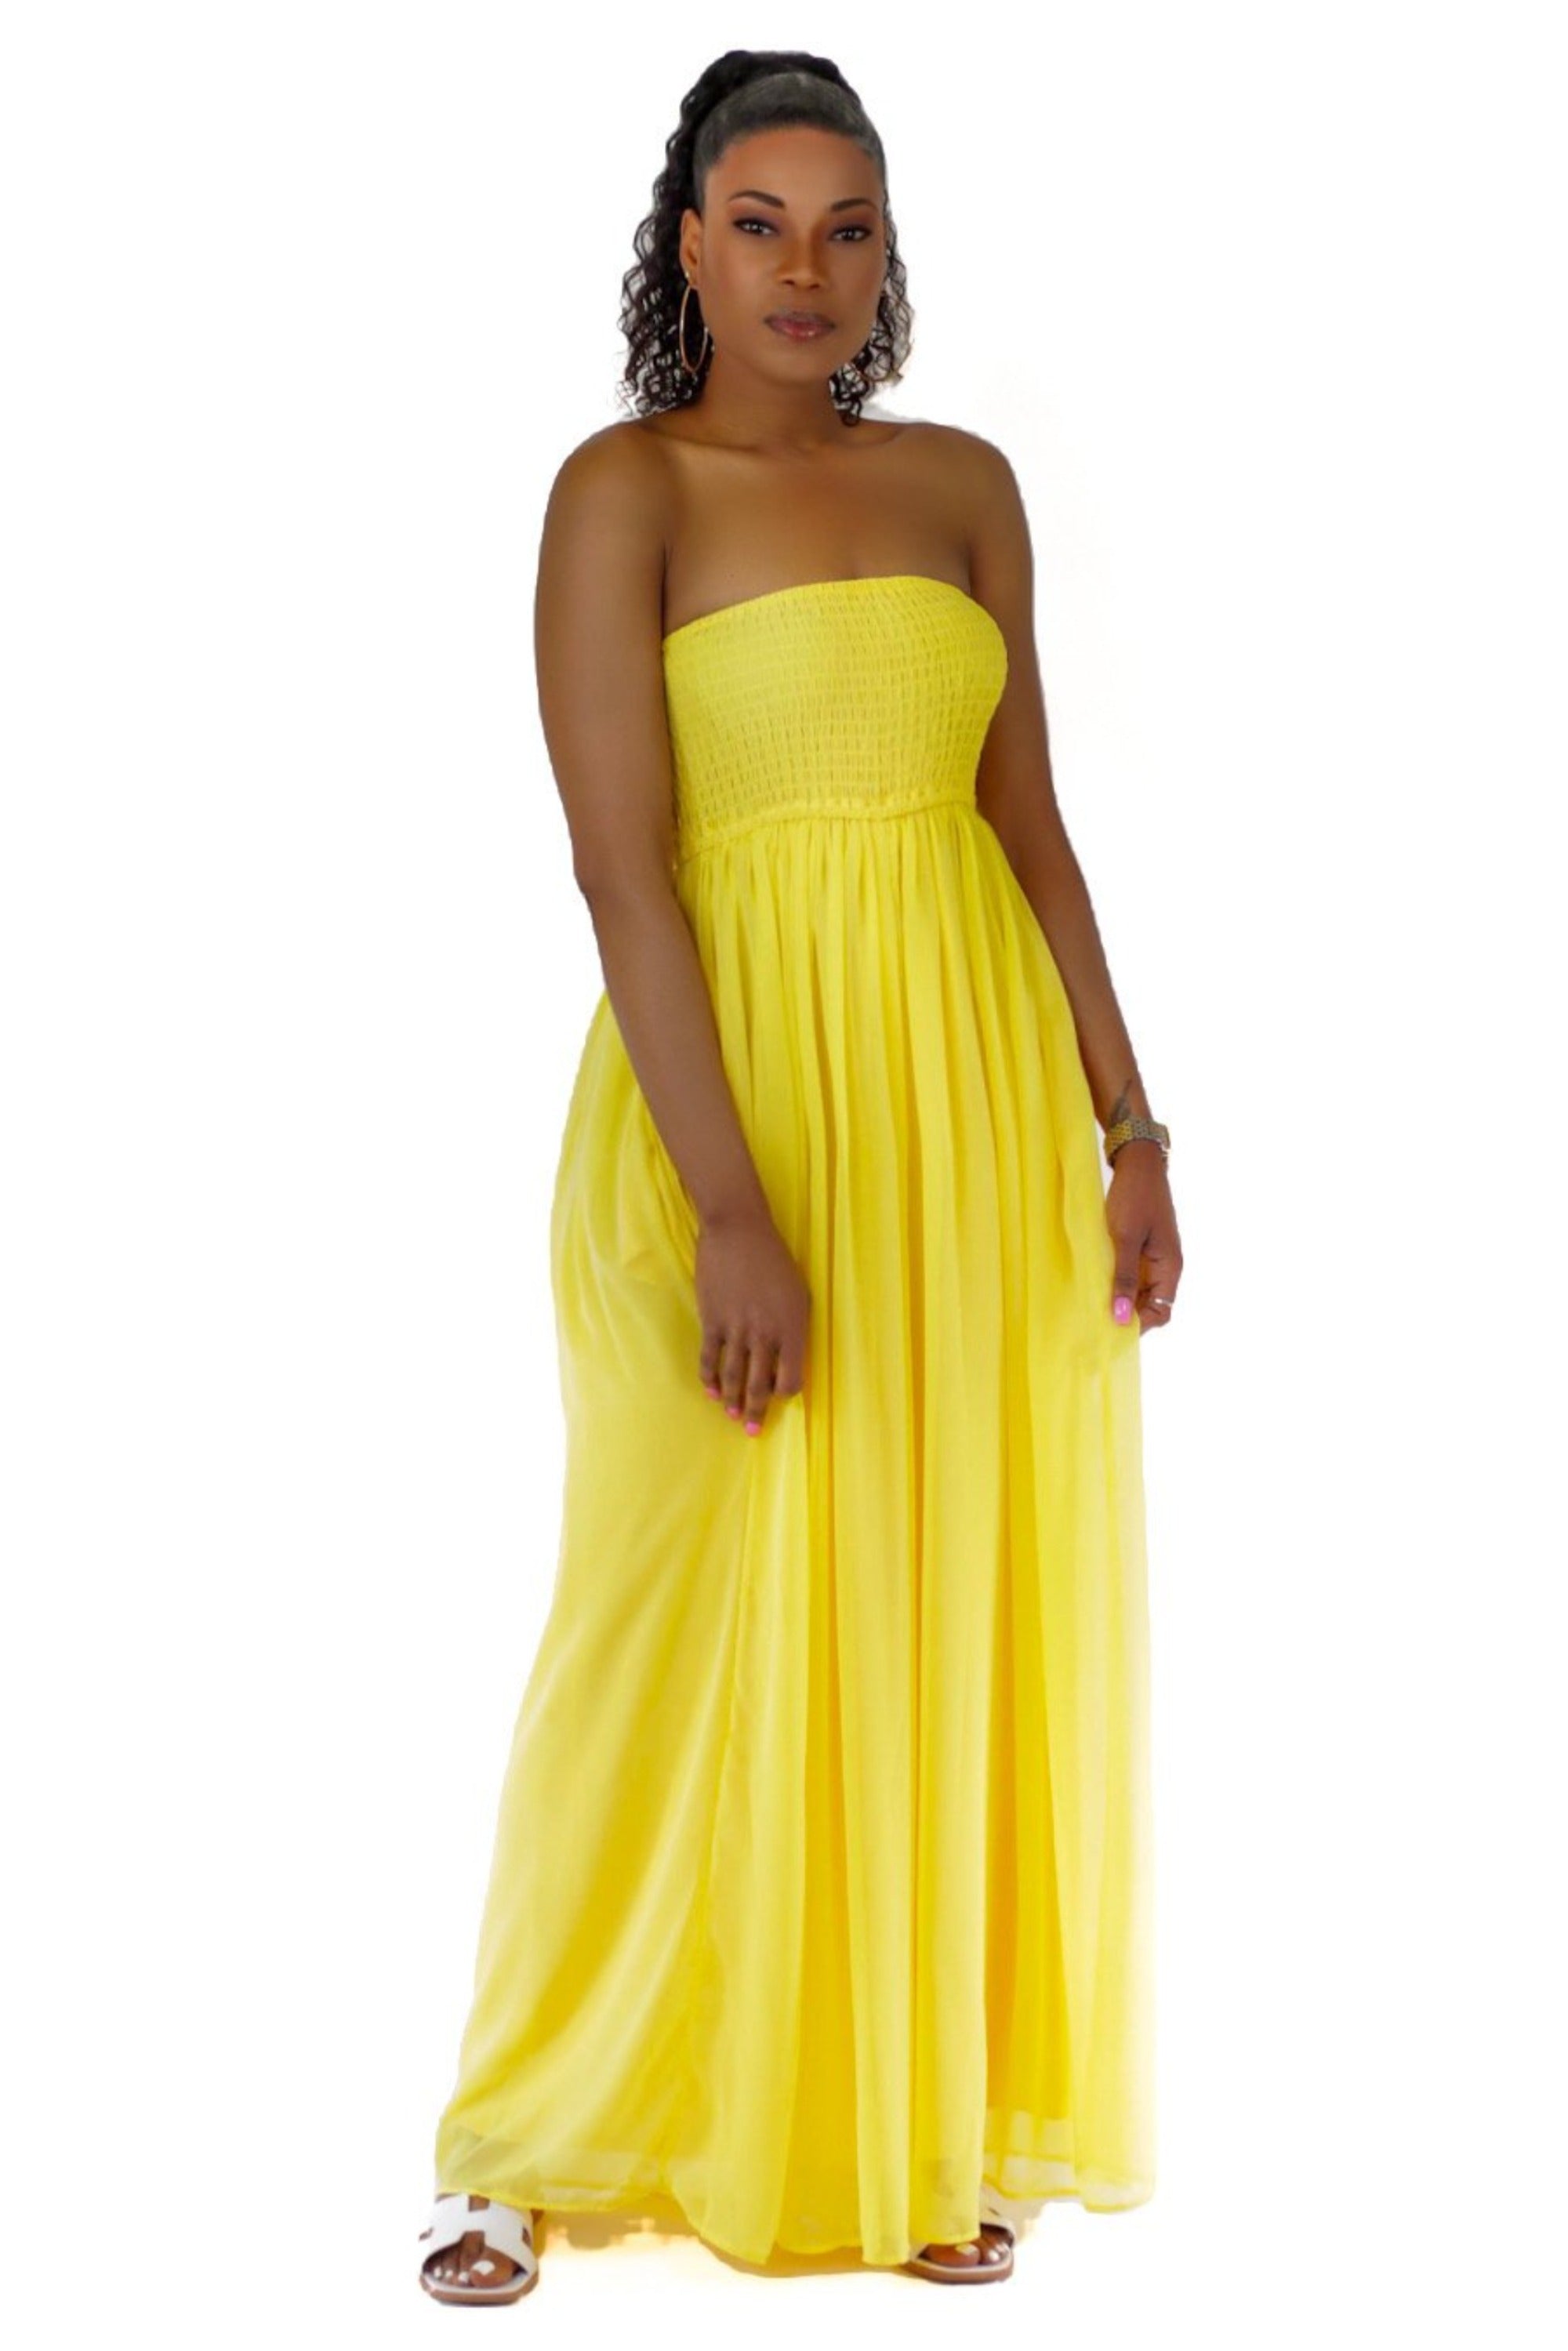 YELLOW FLOWY JUMPSUIT – Glamconic